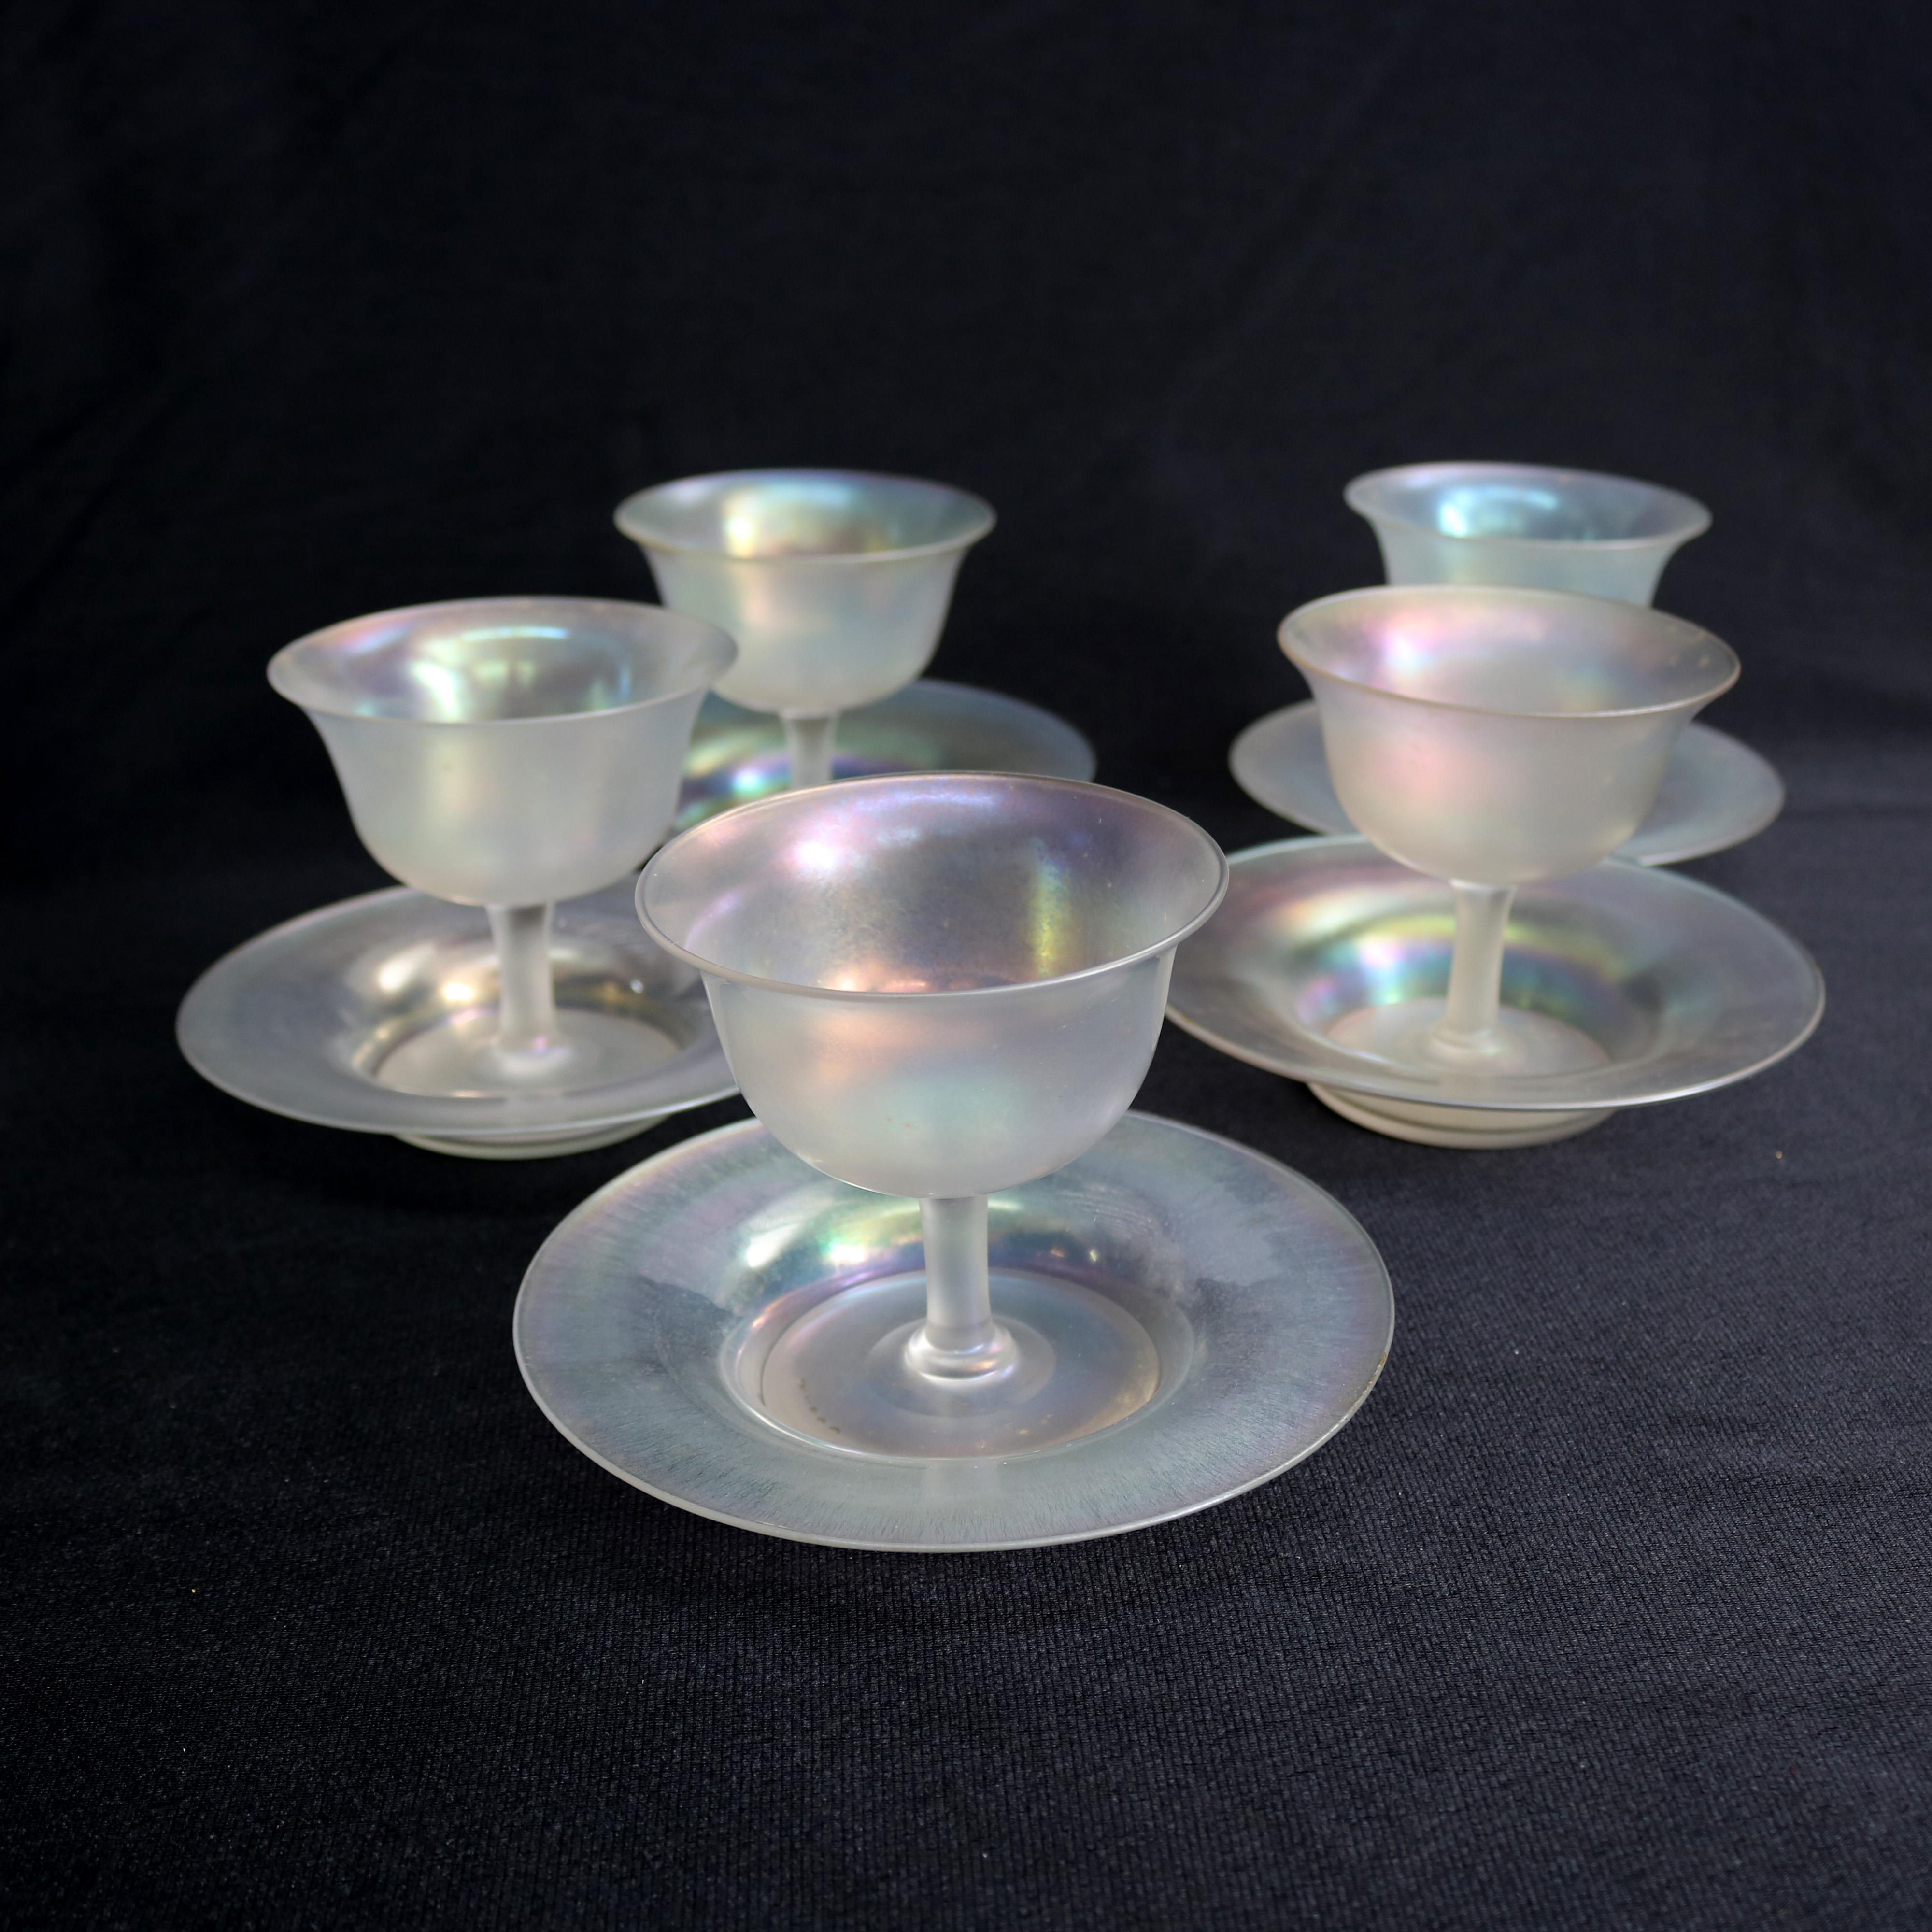 American Steuben Art Glass Stemmed Sherbet Goblets with Saucers, circa 1930s